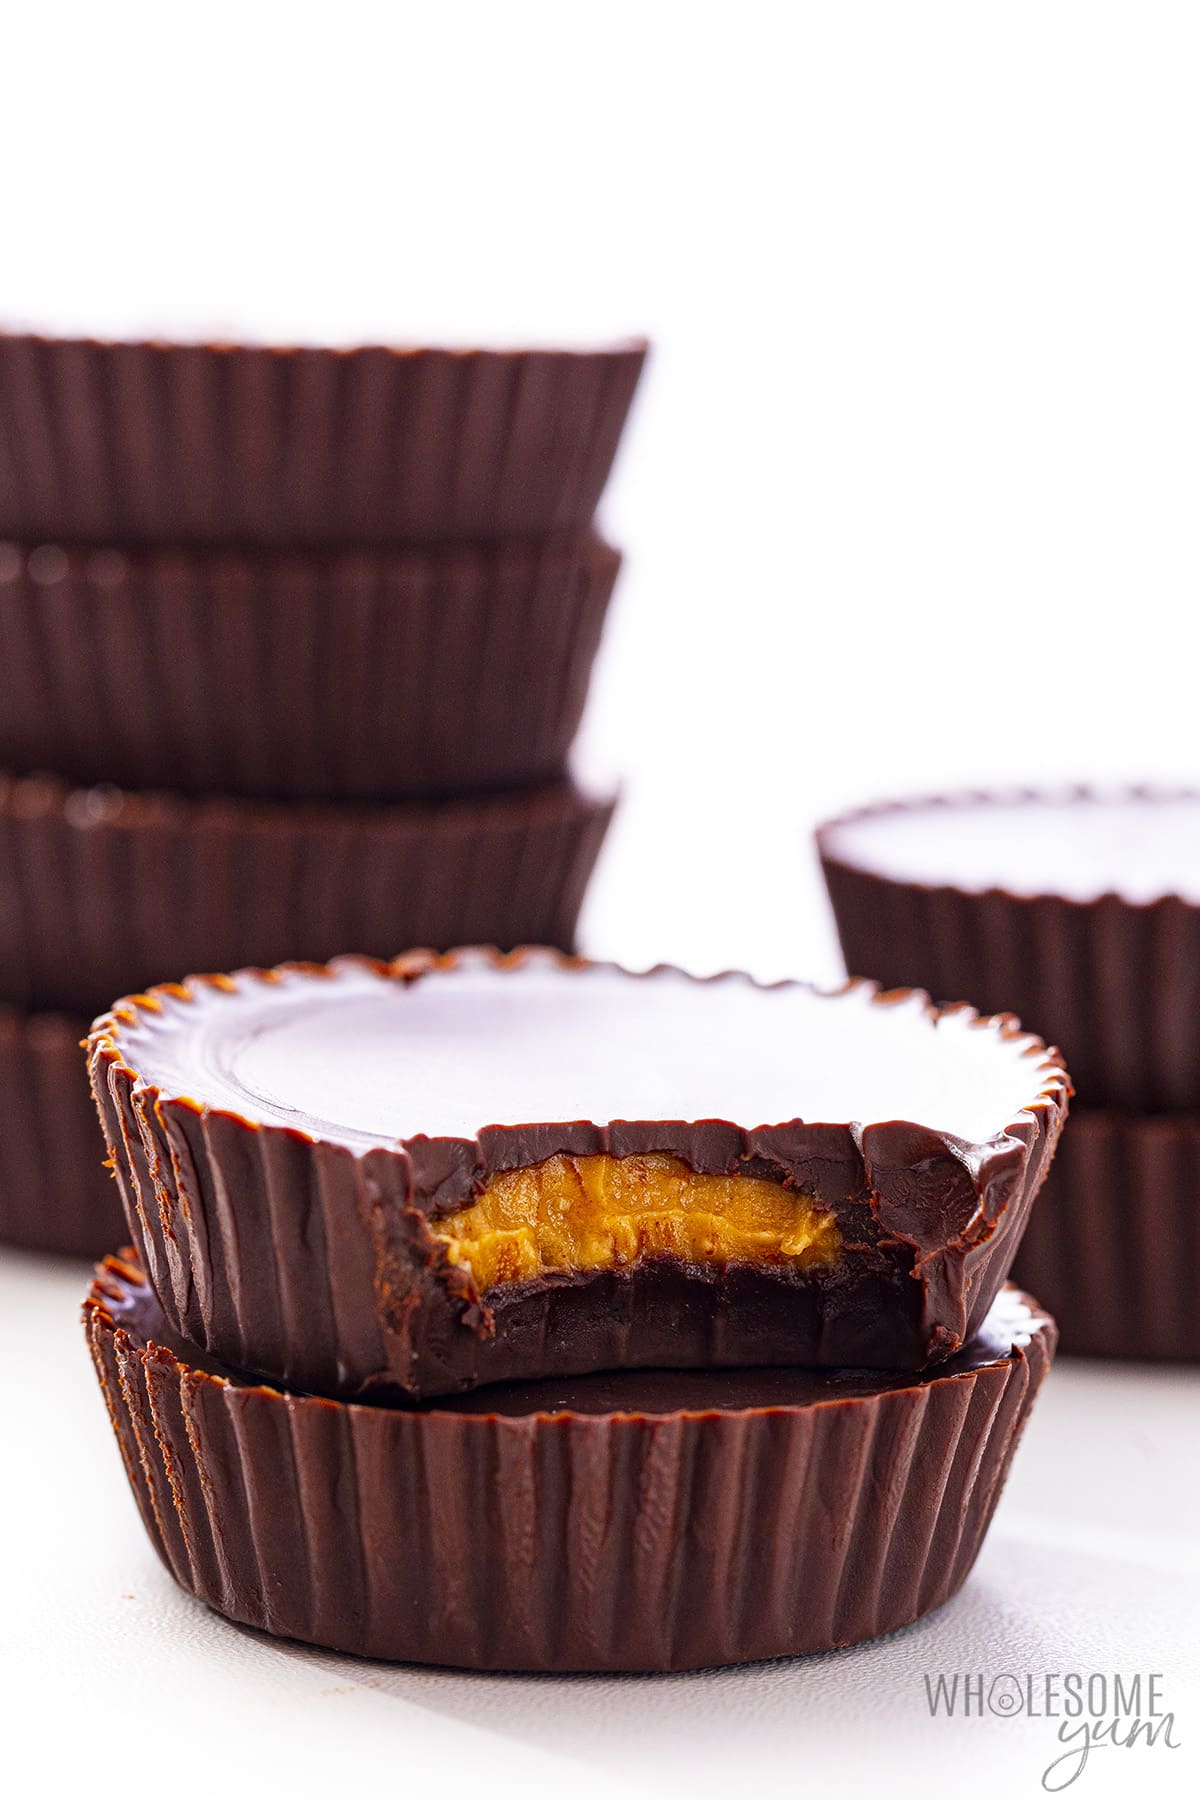 Keto peanut butter cup stacks on a white background, with a bite taken out of one of them.